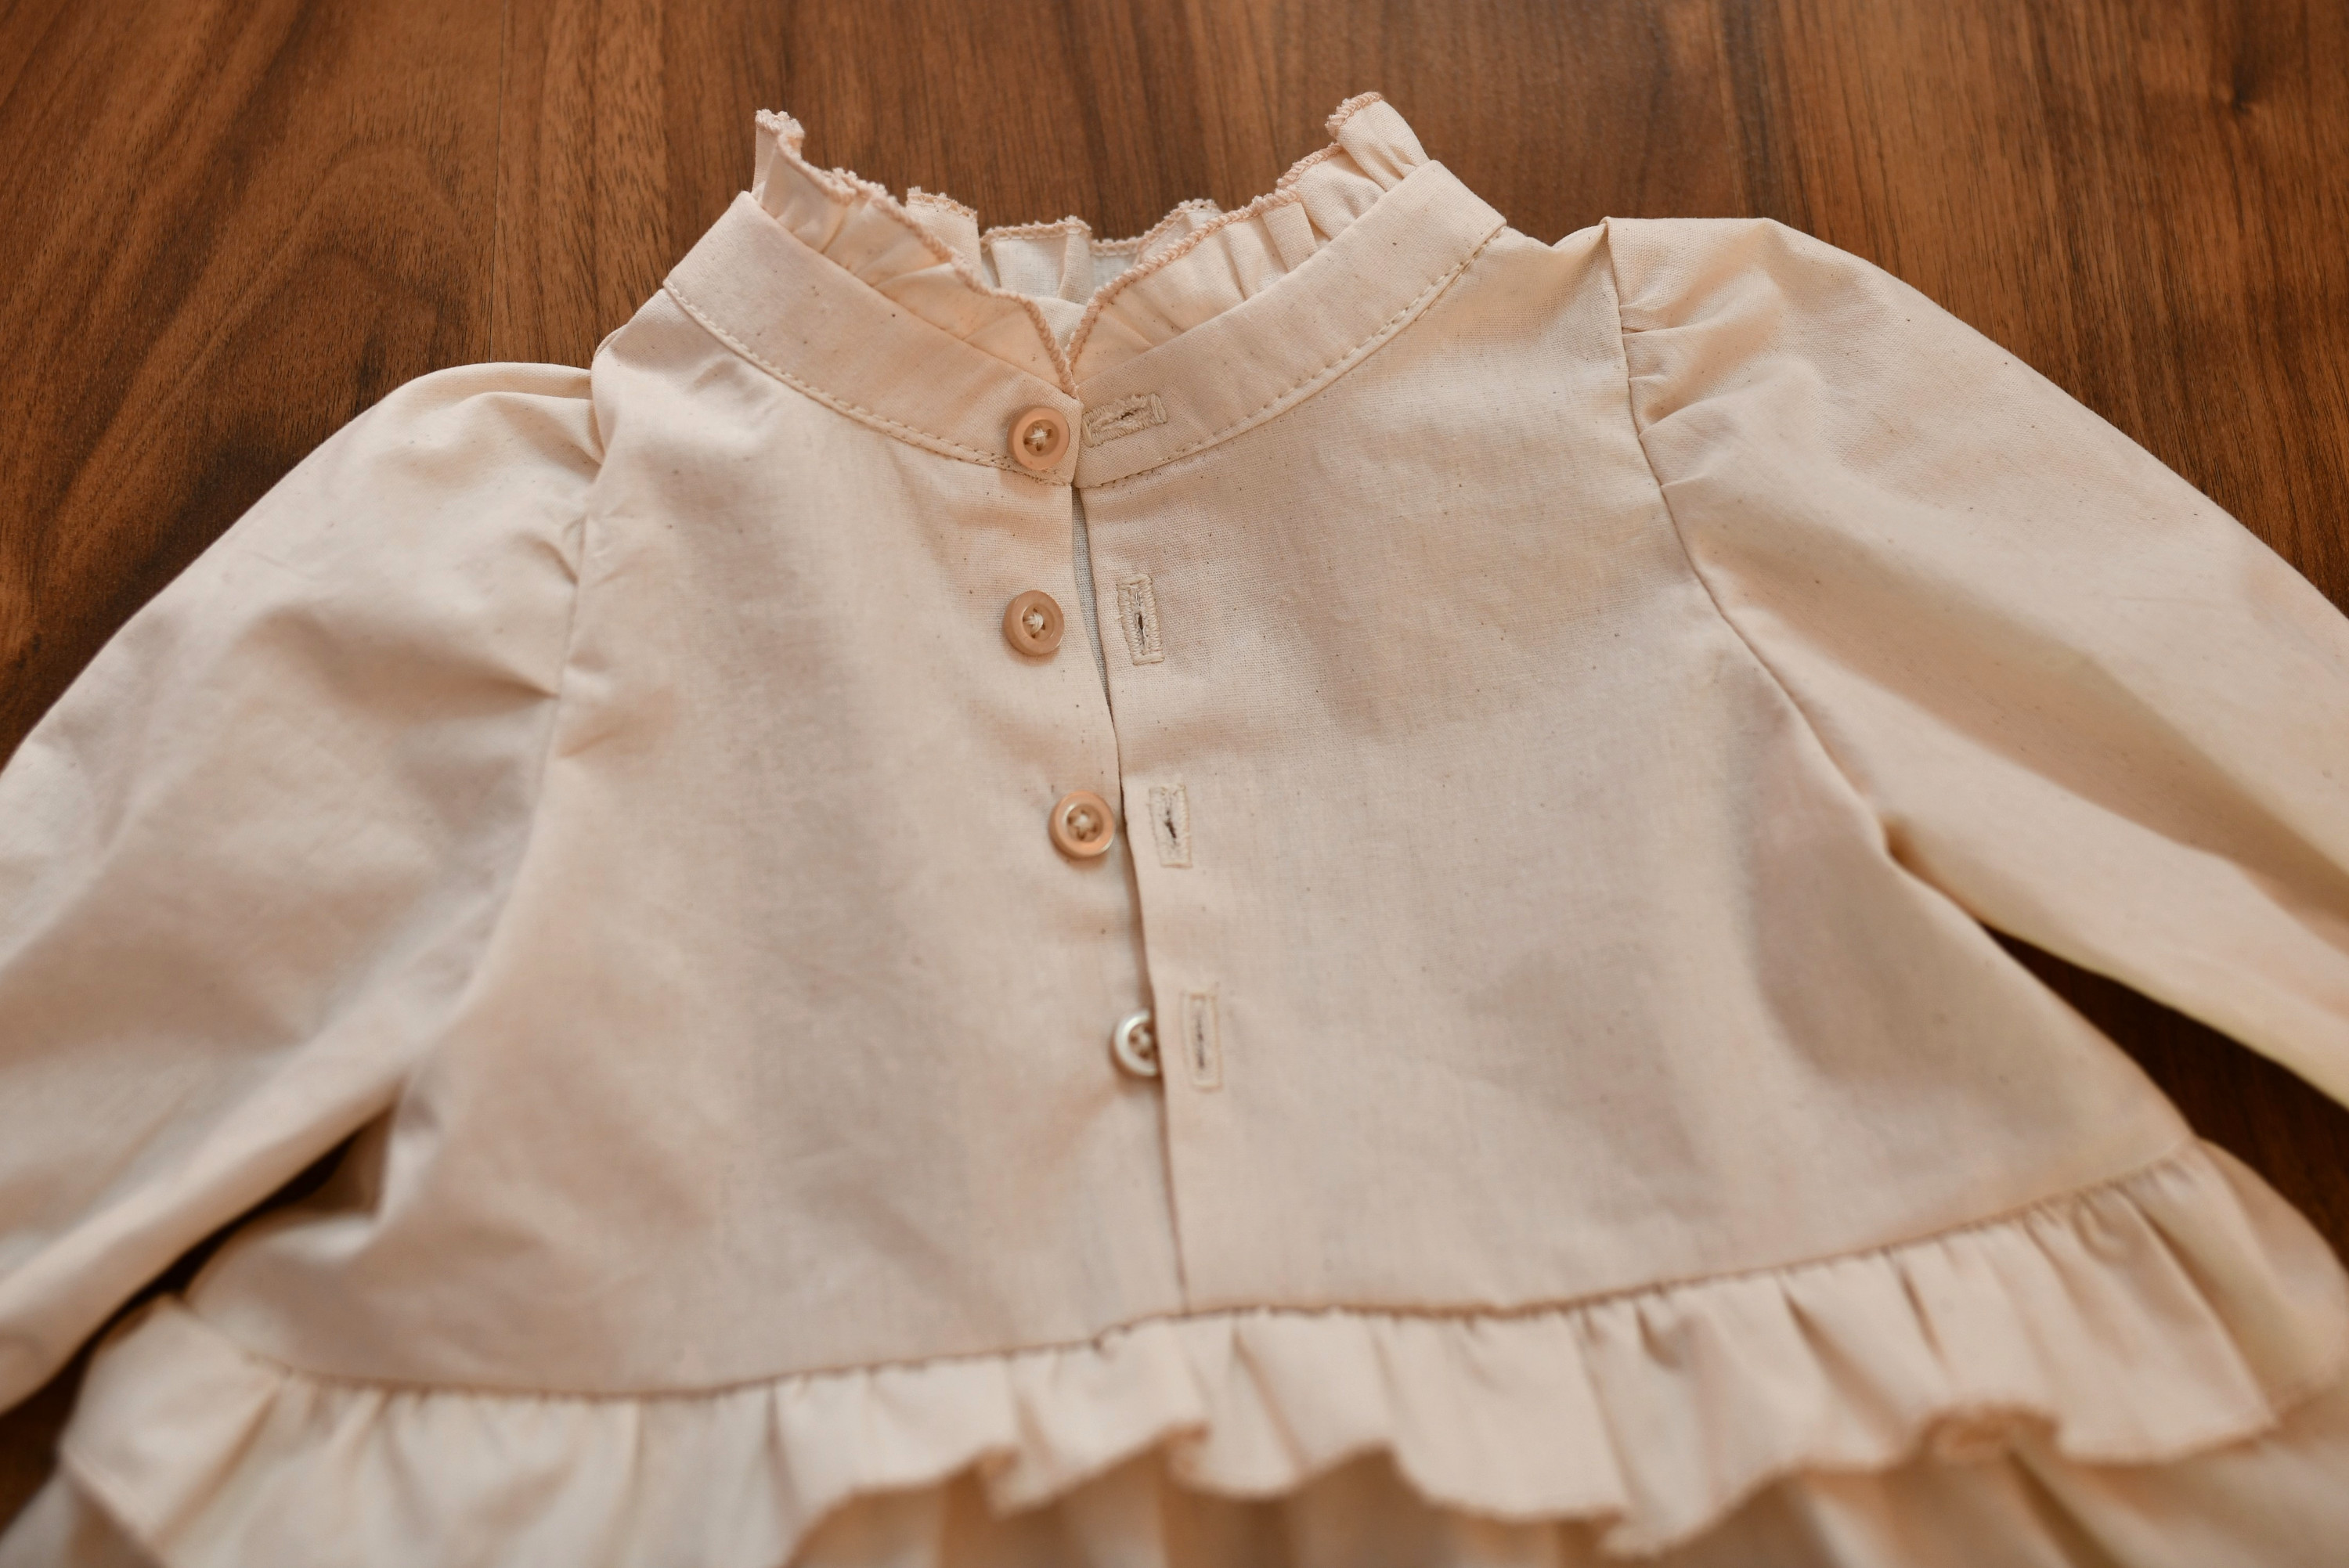 DIY baby dress with buttons and ruffles